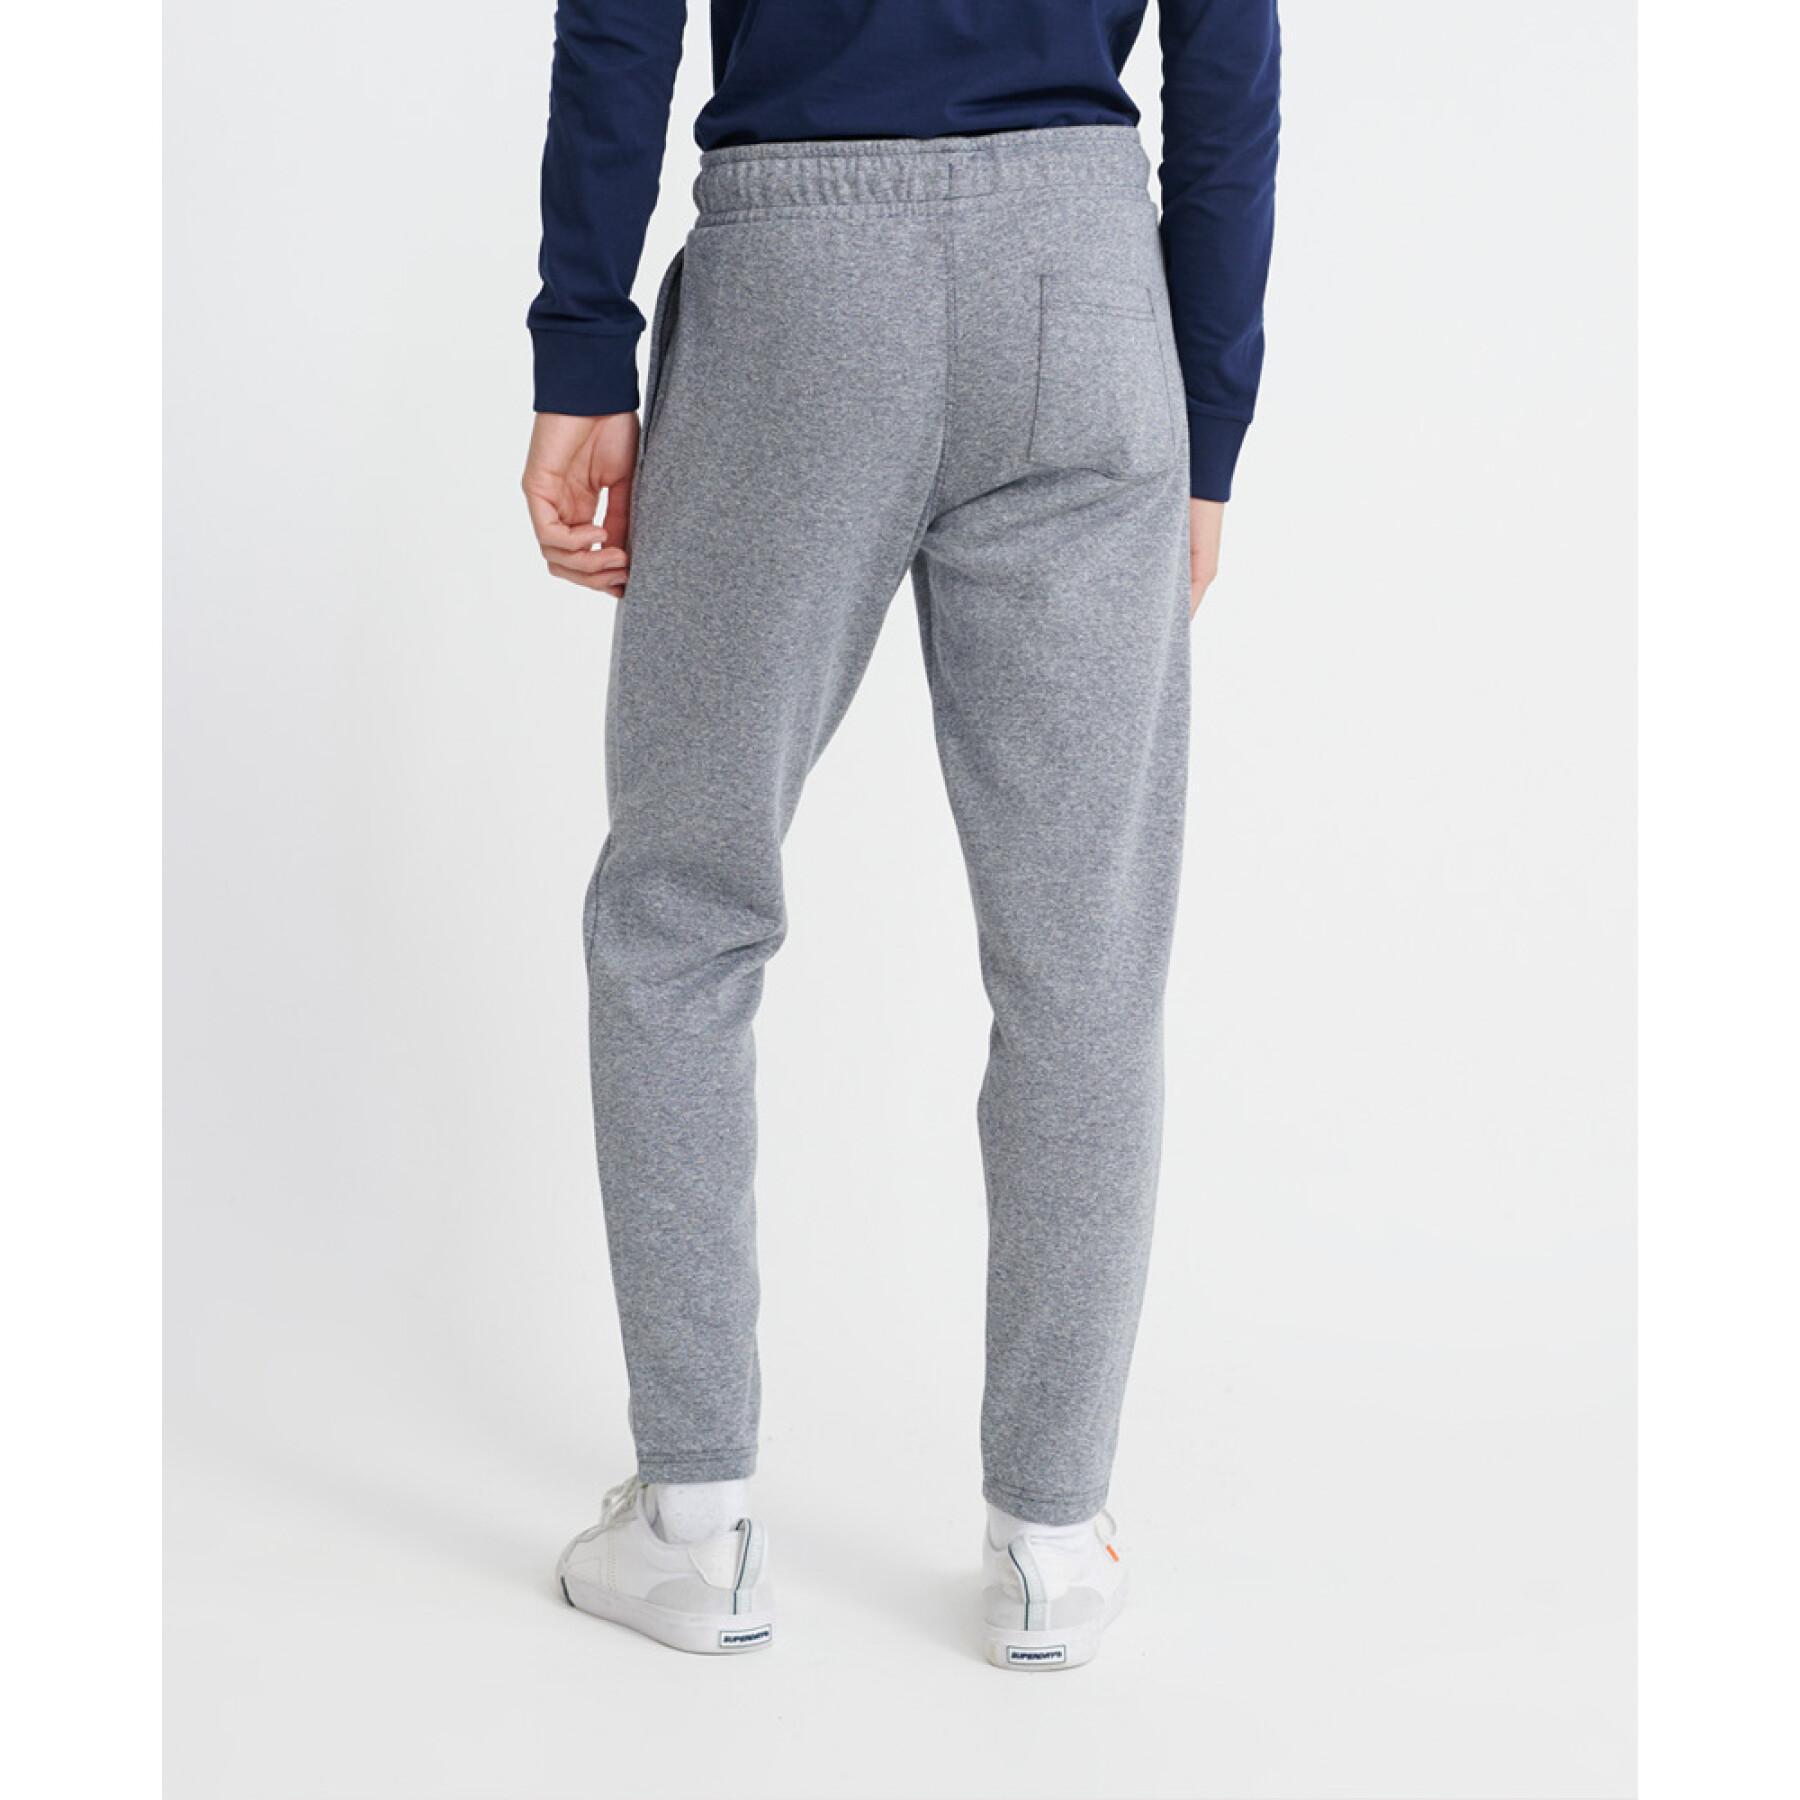 Tapered jogging suit Superdry Urban Tech